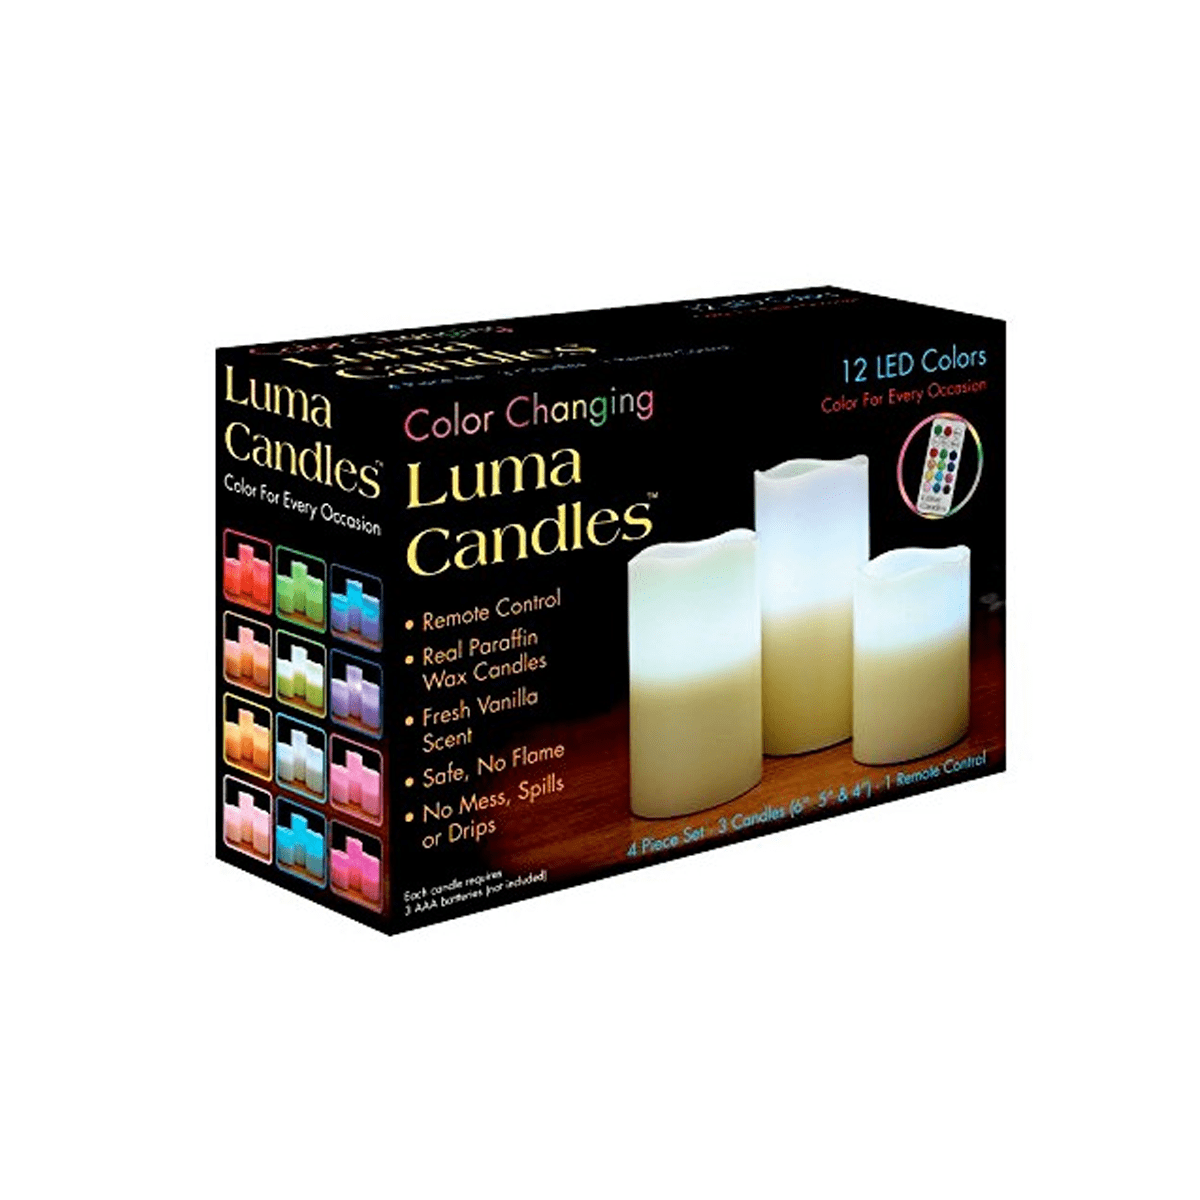 Flameless Color Changing Candles with Remote Control - SquareDubai